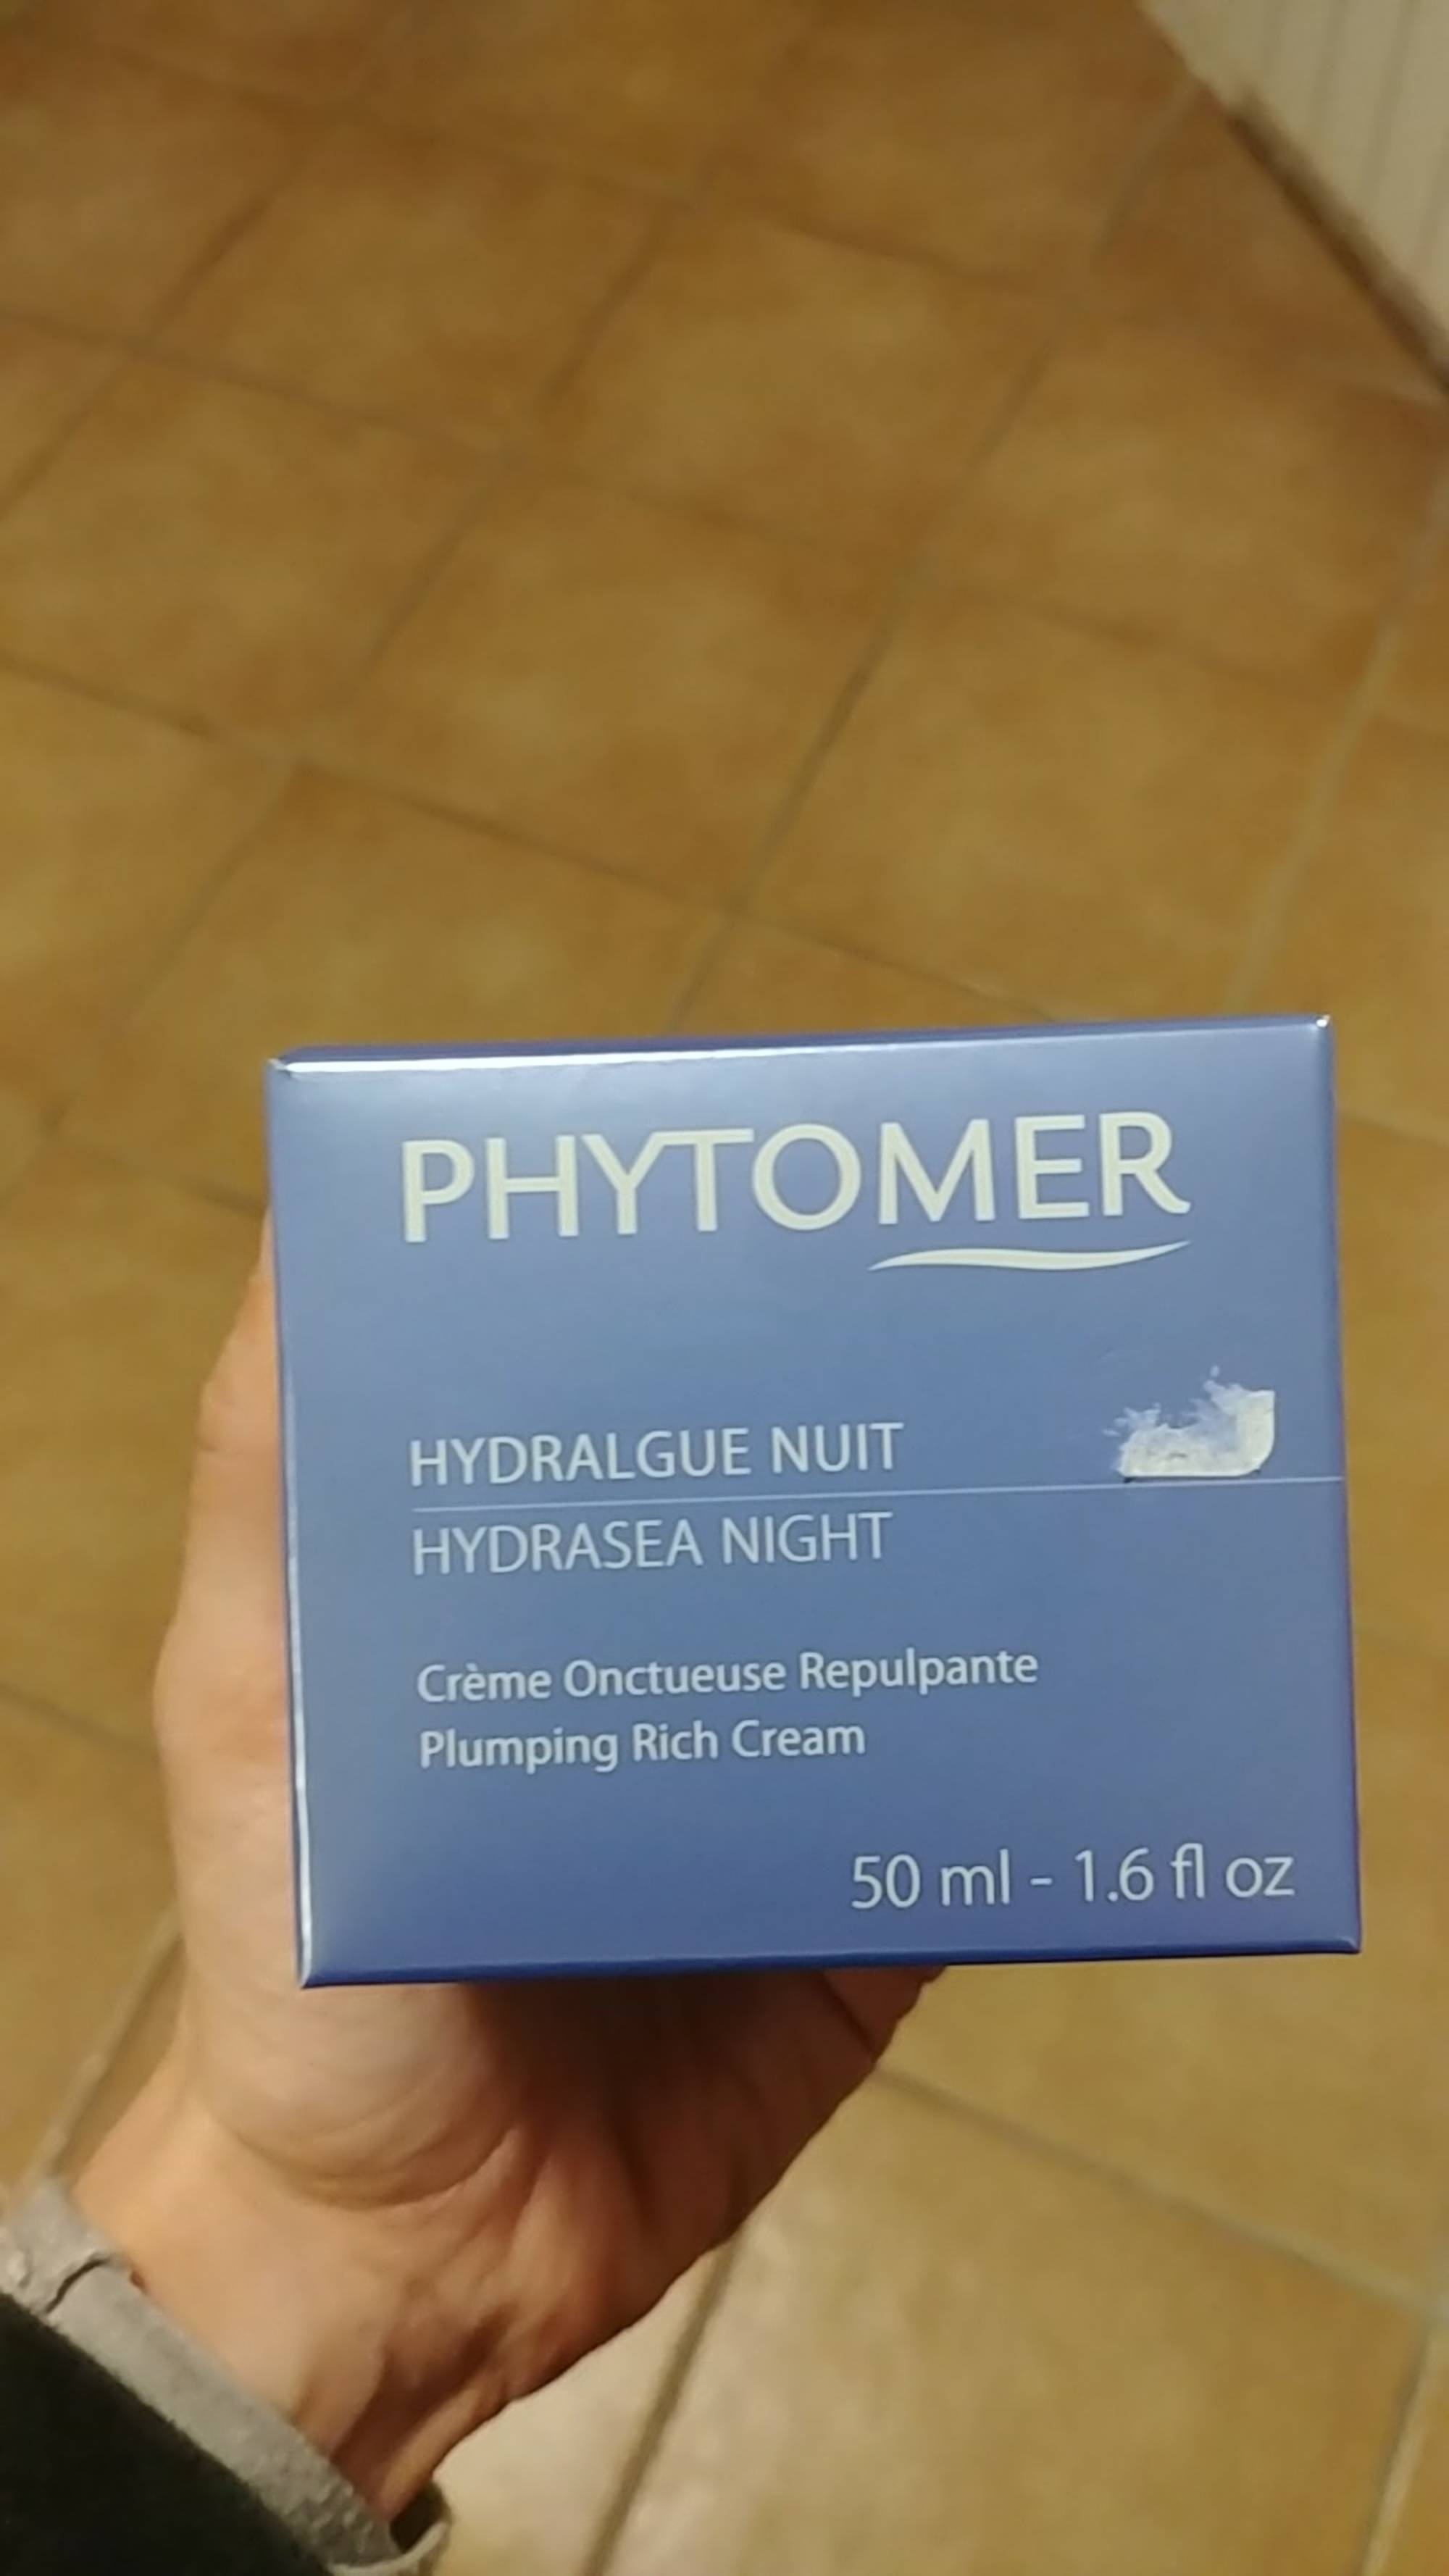 PHYTOMER - Crème onctueuse repulpante